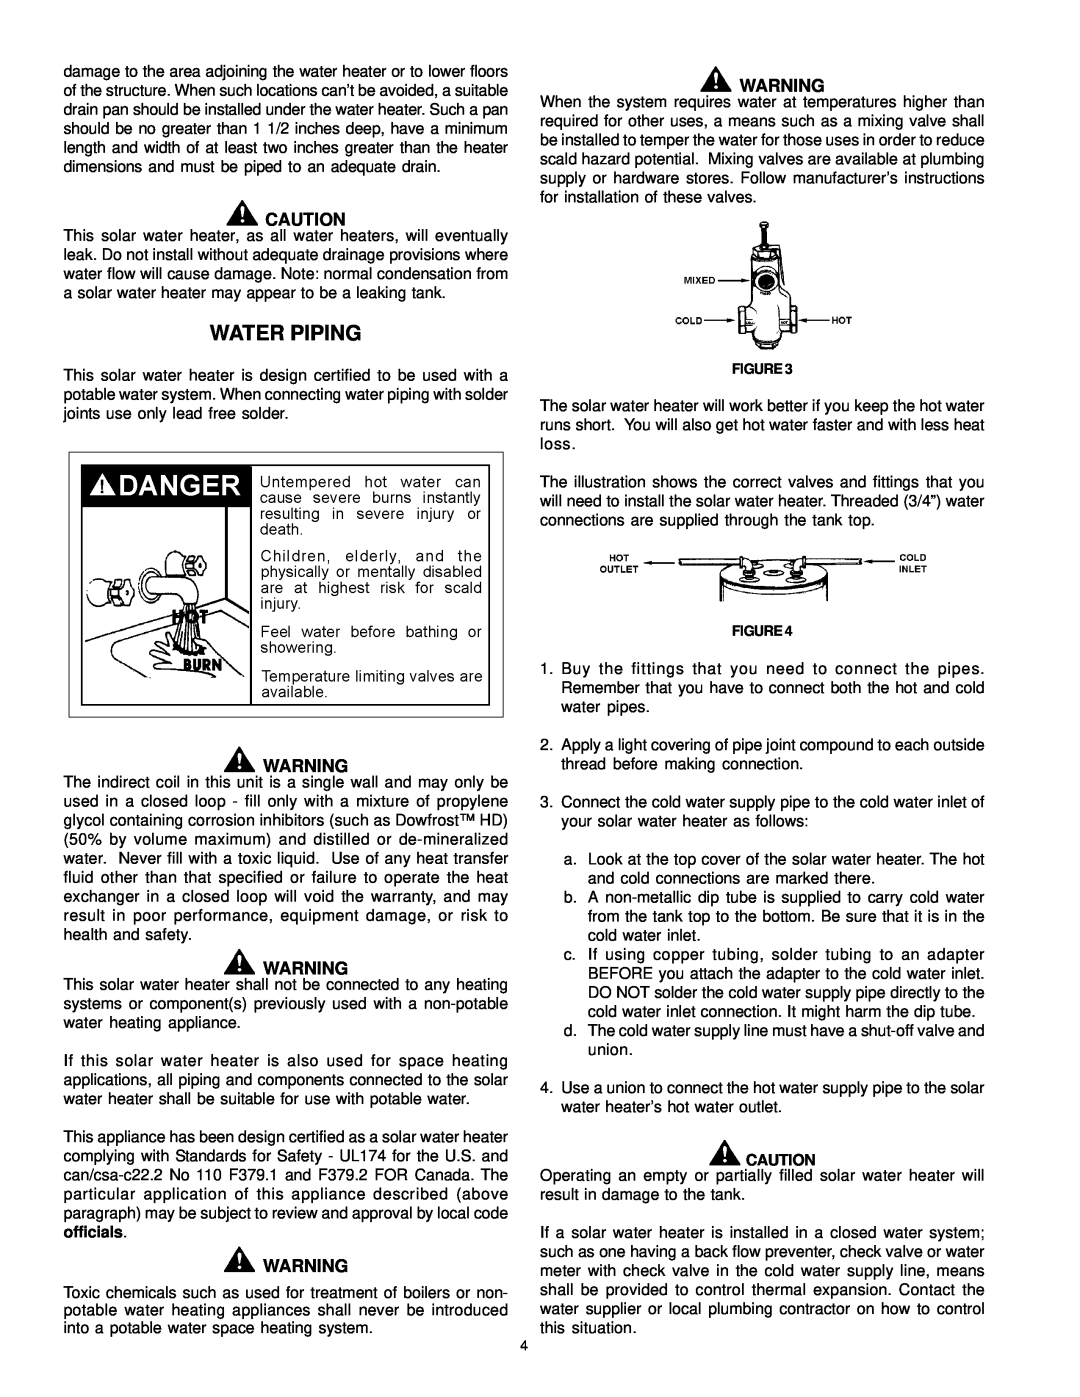 American Water Heater 317365-002 instruction manual Water Piping 